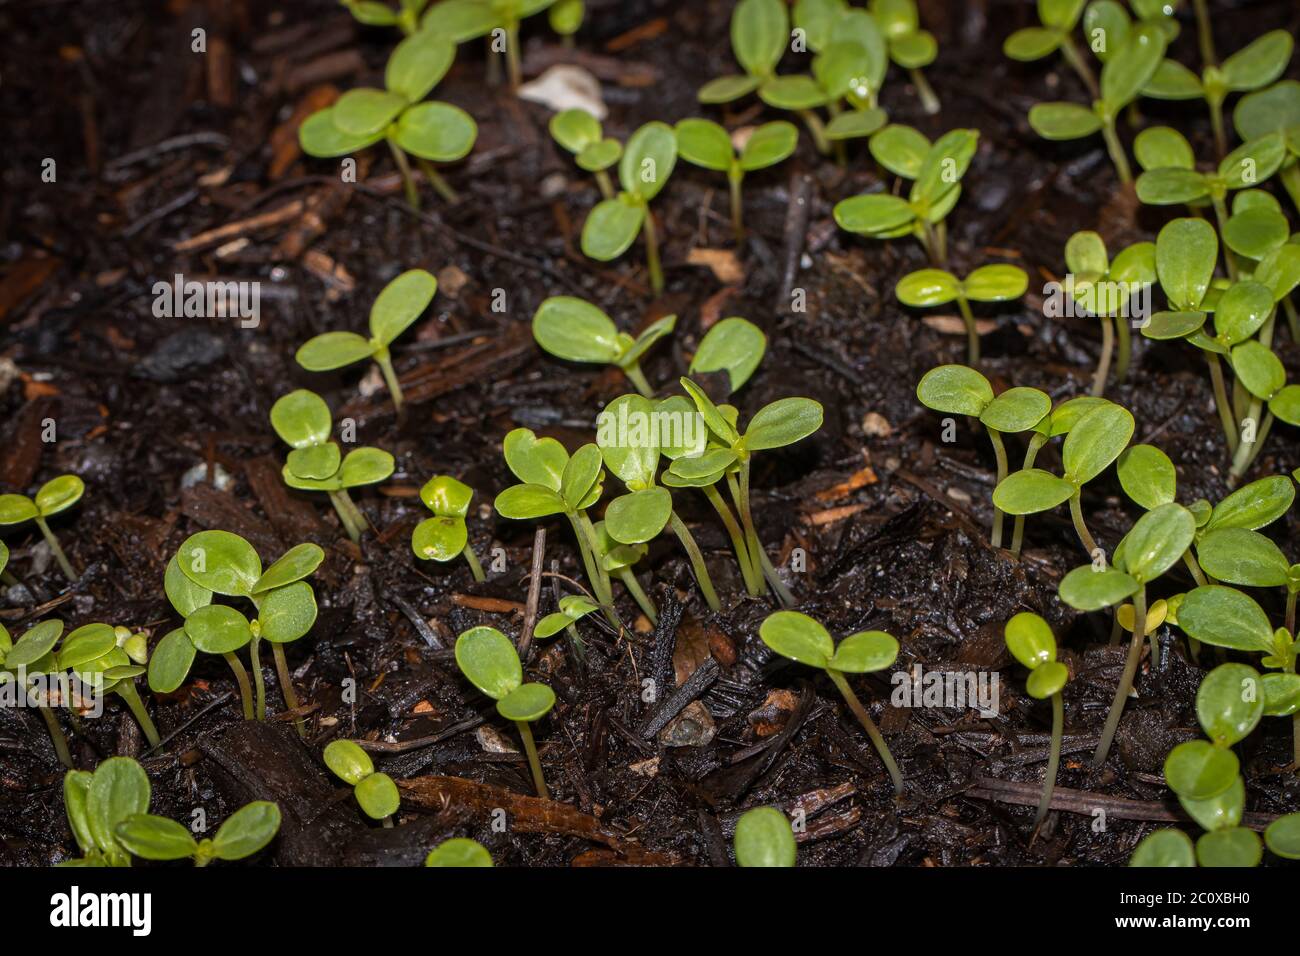 detail of the seed germination phase with newly sprouted seedlings Stock Photo